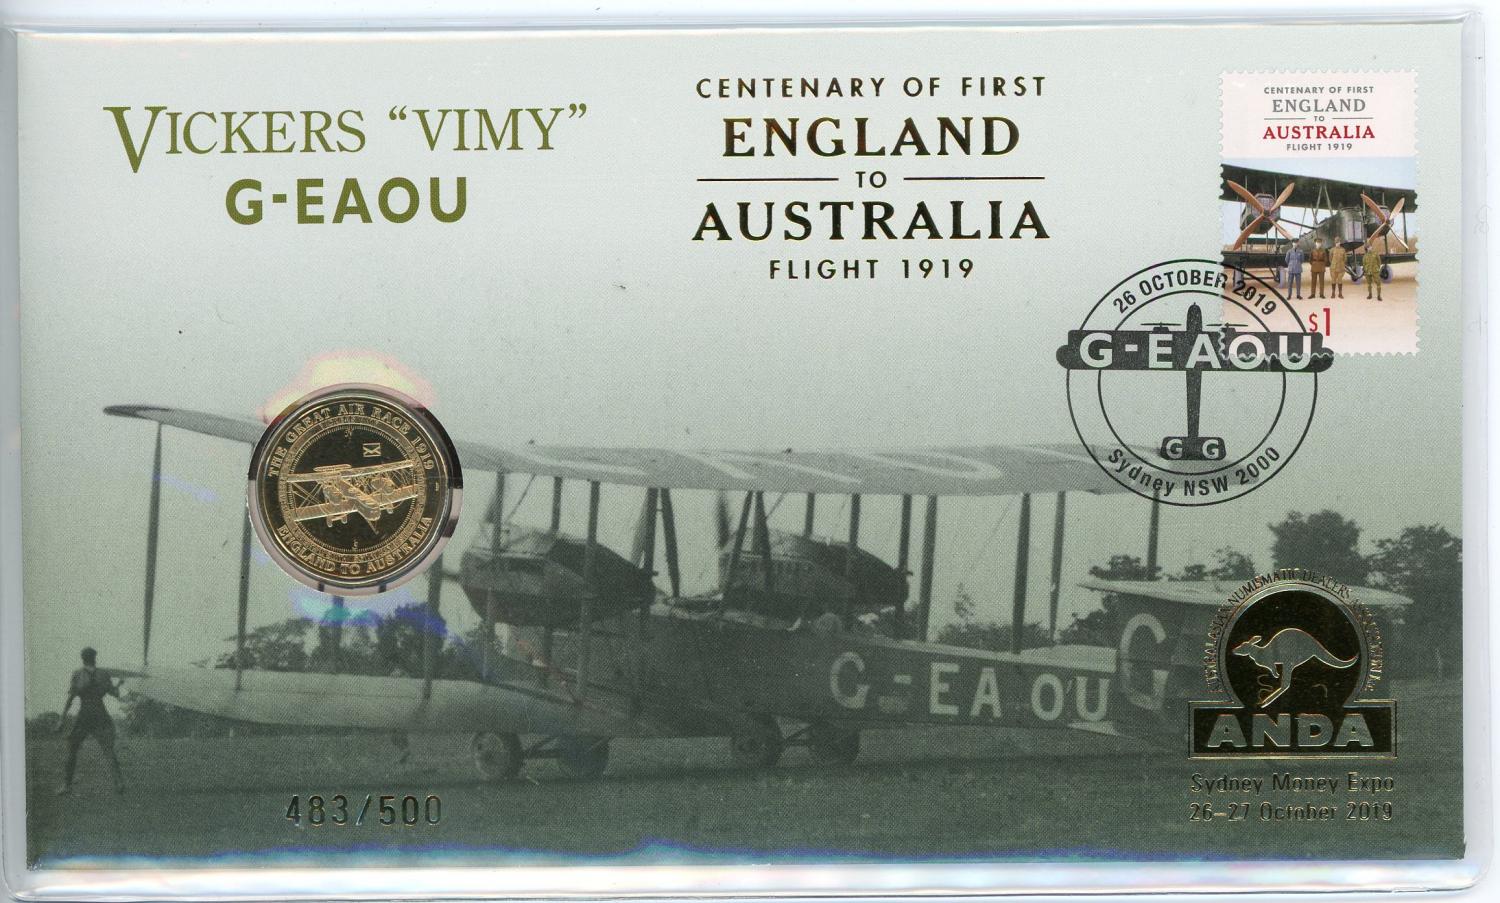 Thumbnail for 2019 Centenary of First Flight England to Aust Flight 1919 Vickers 'Vimy' G-EAOU Sydney Money Expo ANDA PNC With Envelope Privy